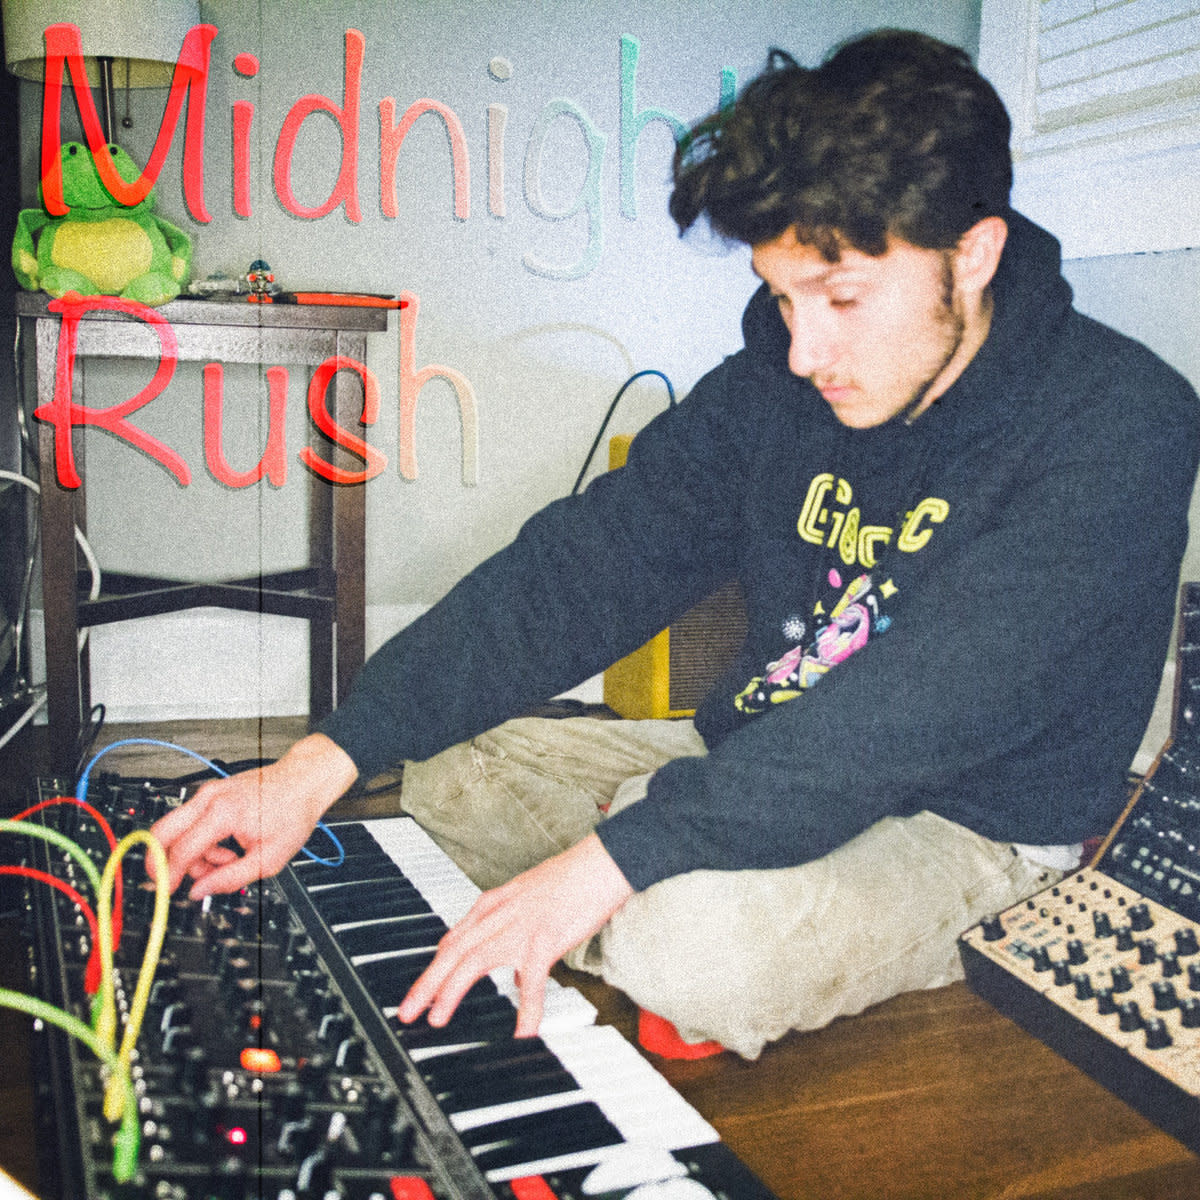 synth-single-review-midnight-rush-by-geovoc